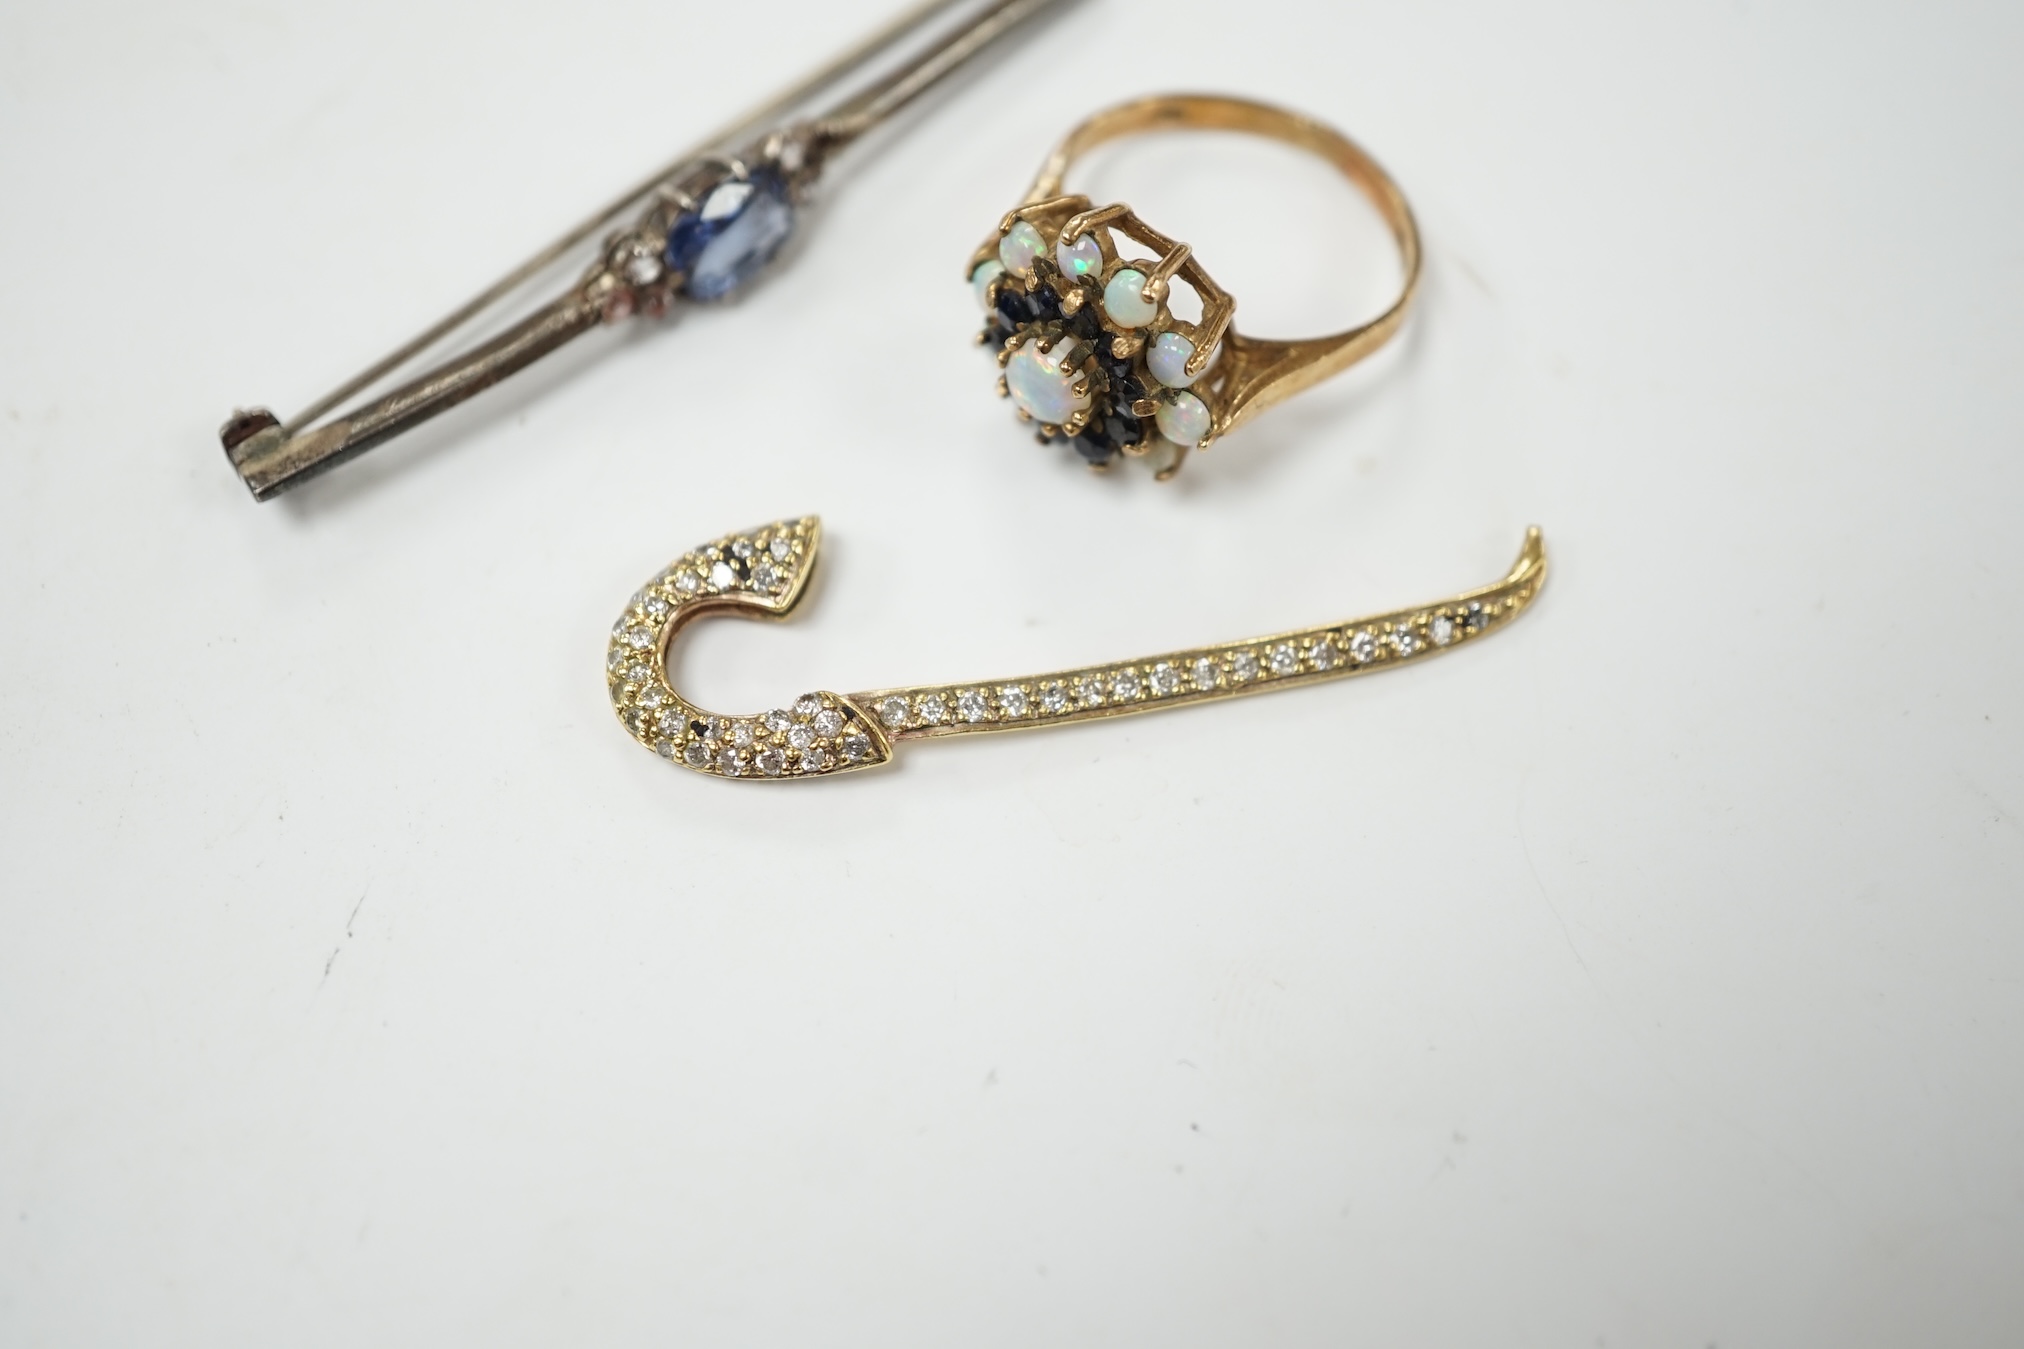 A yellow metal and pave set diamond miniature walking cane, 43mm, together with a 9ct gold, white opal and sapphire cluster set ring and a two colour sapphire set white metal bar brooch. Condition - poor to fair